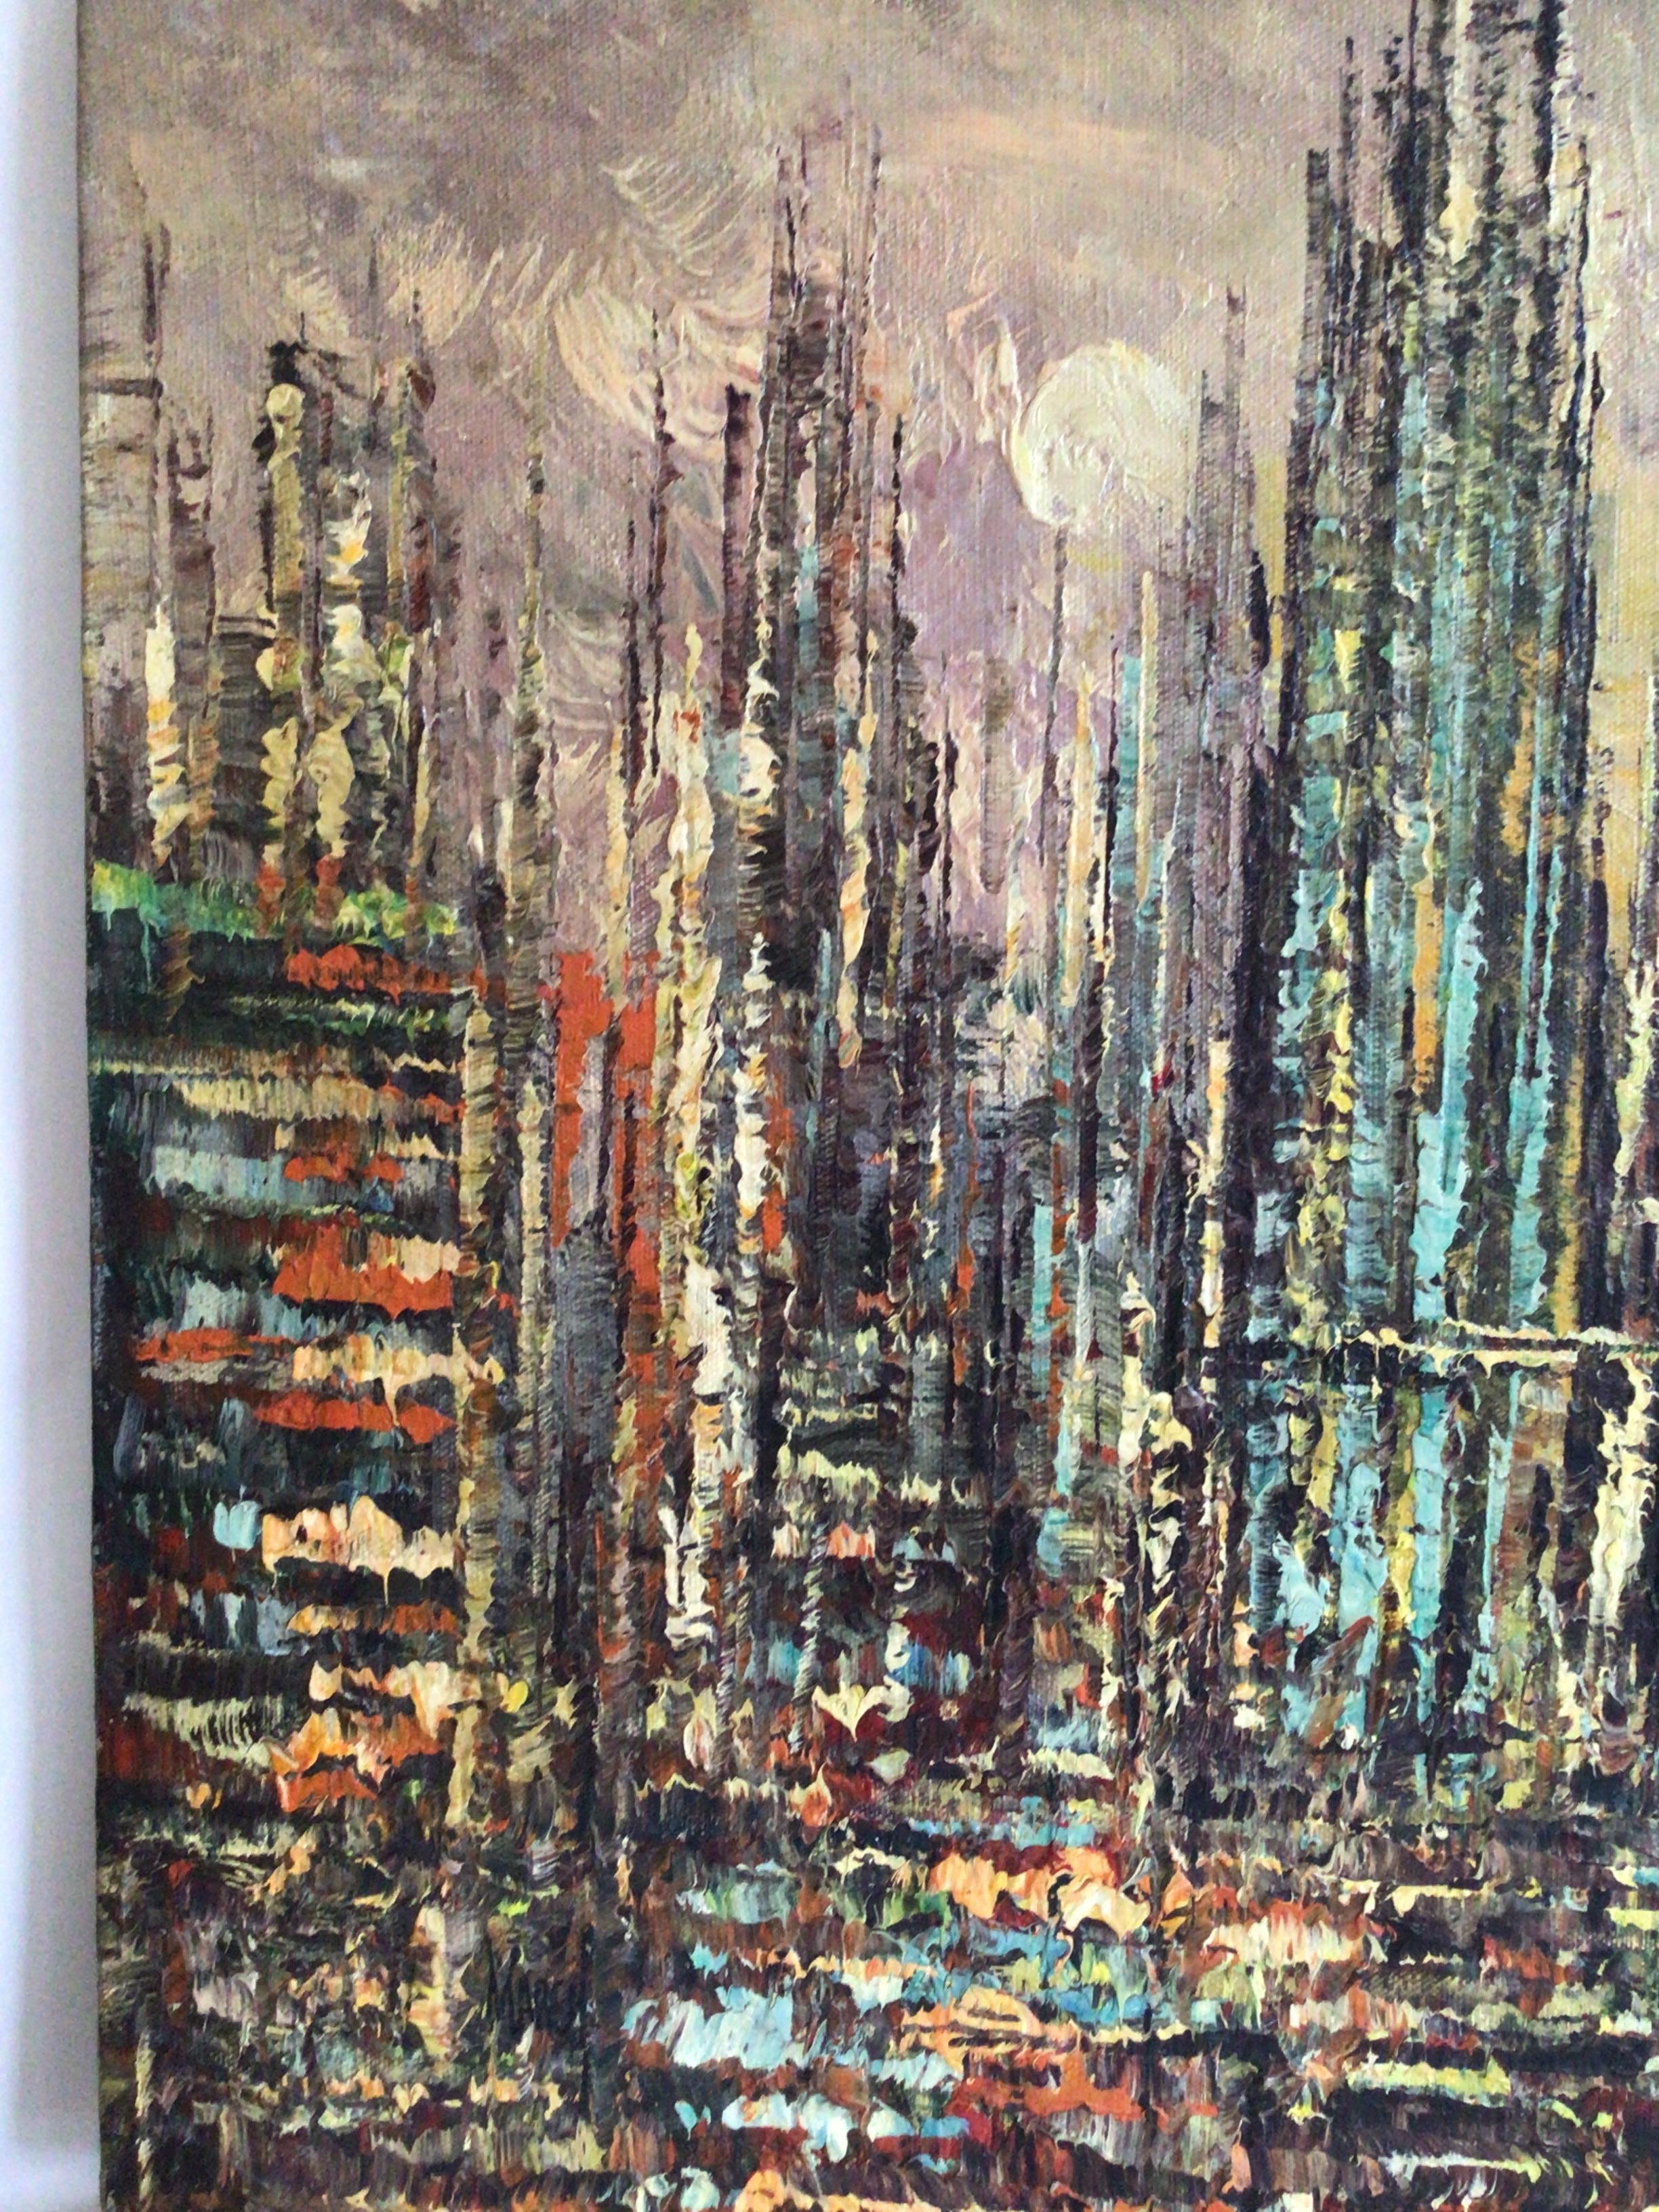 Hand-Painted 1950s Oil Painting on Canvas Of Abstract Cityscape For Sale